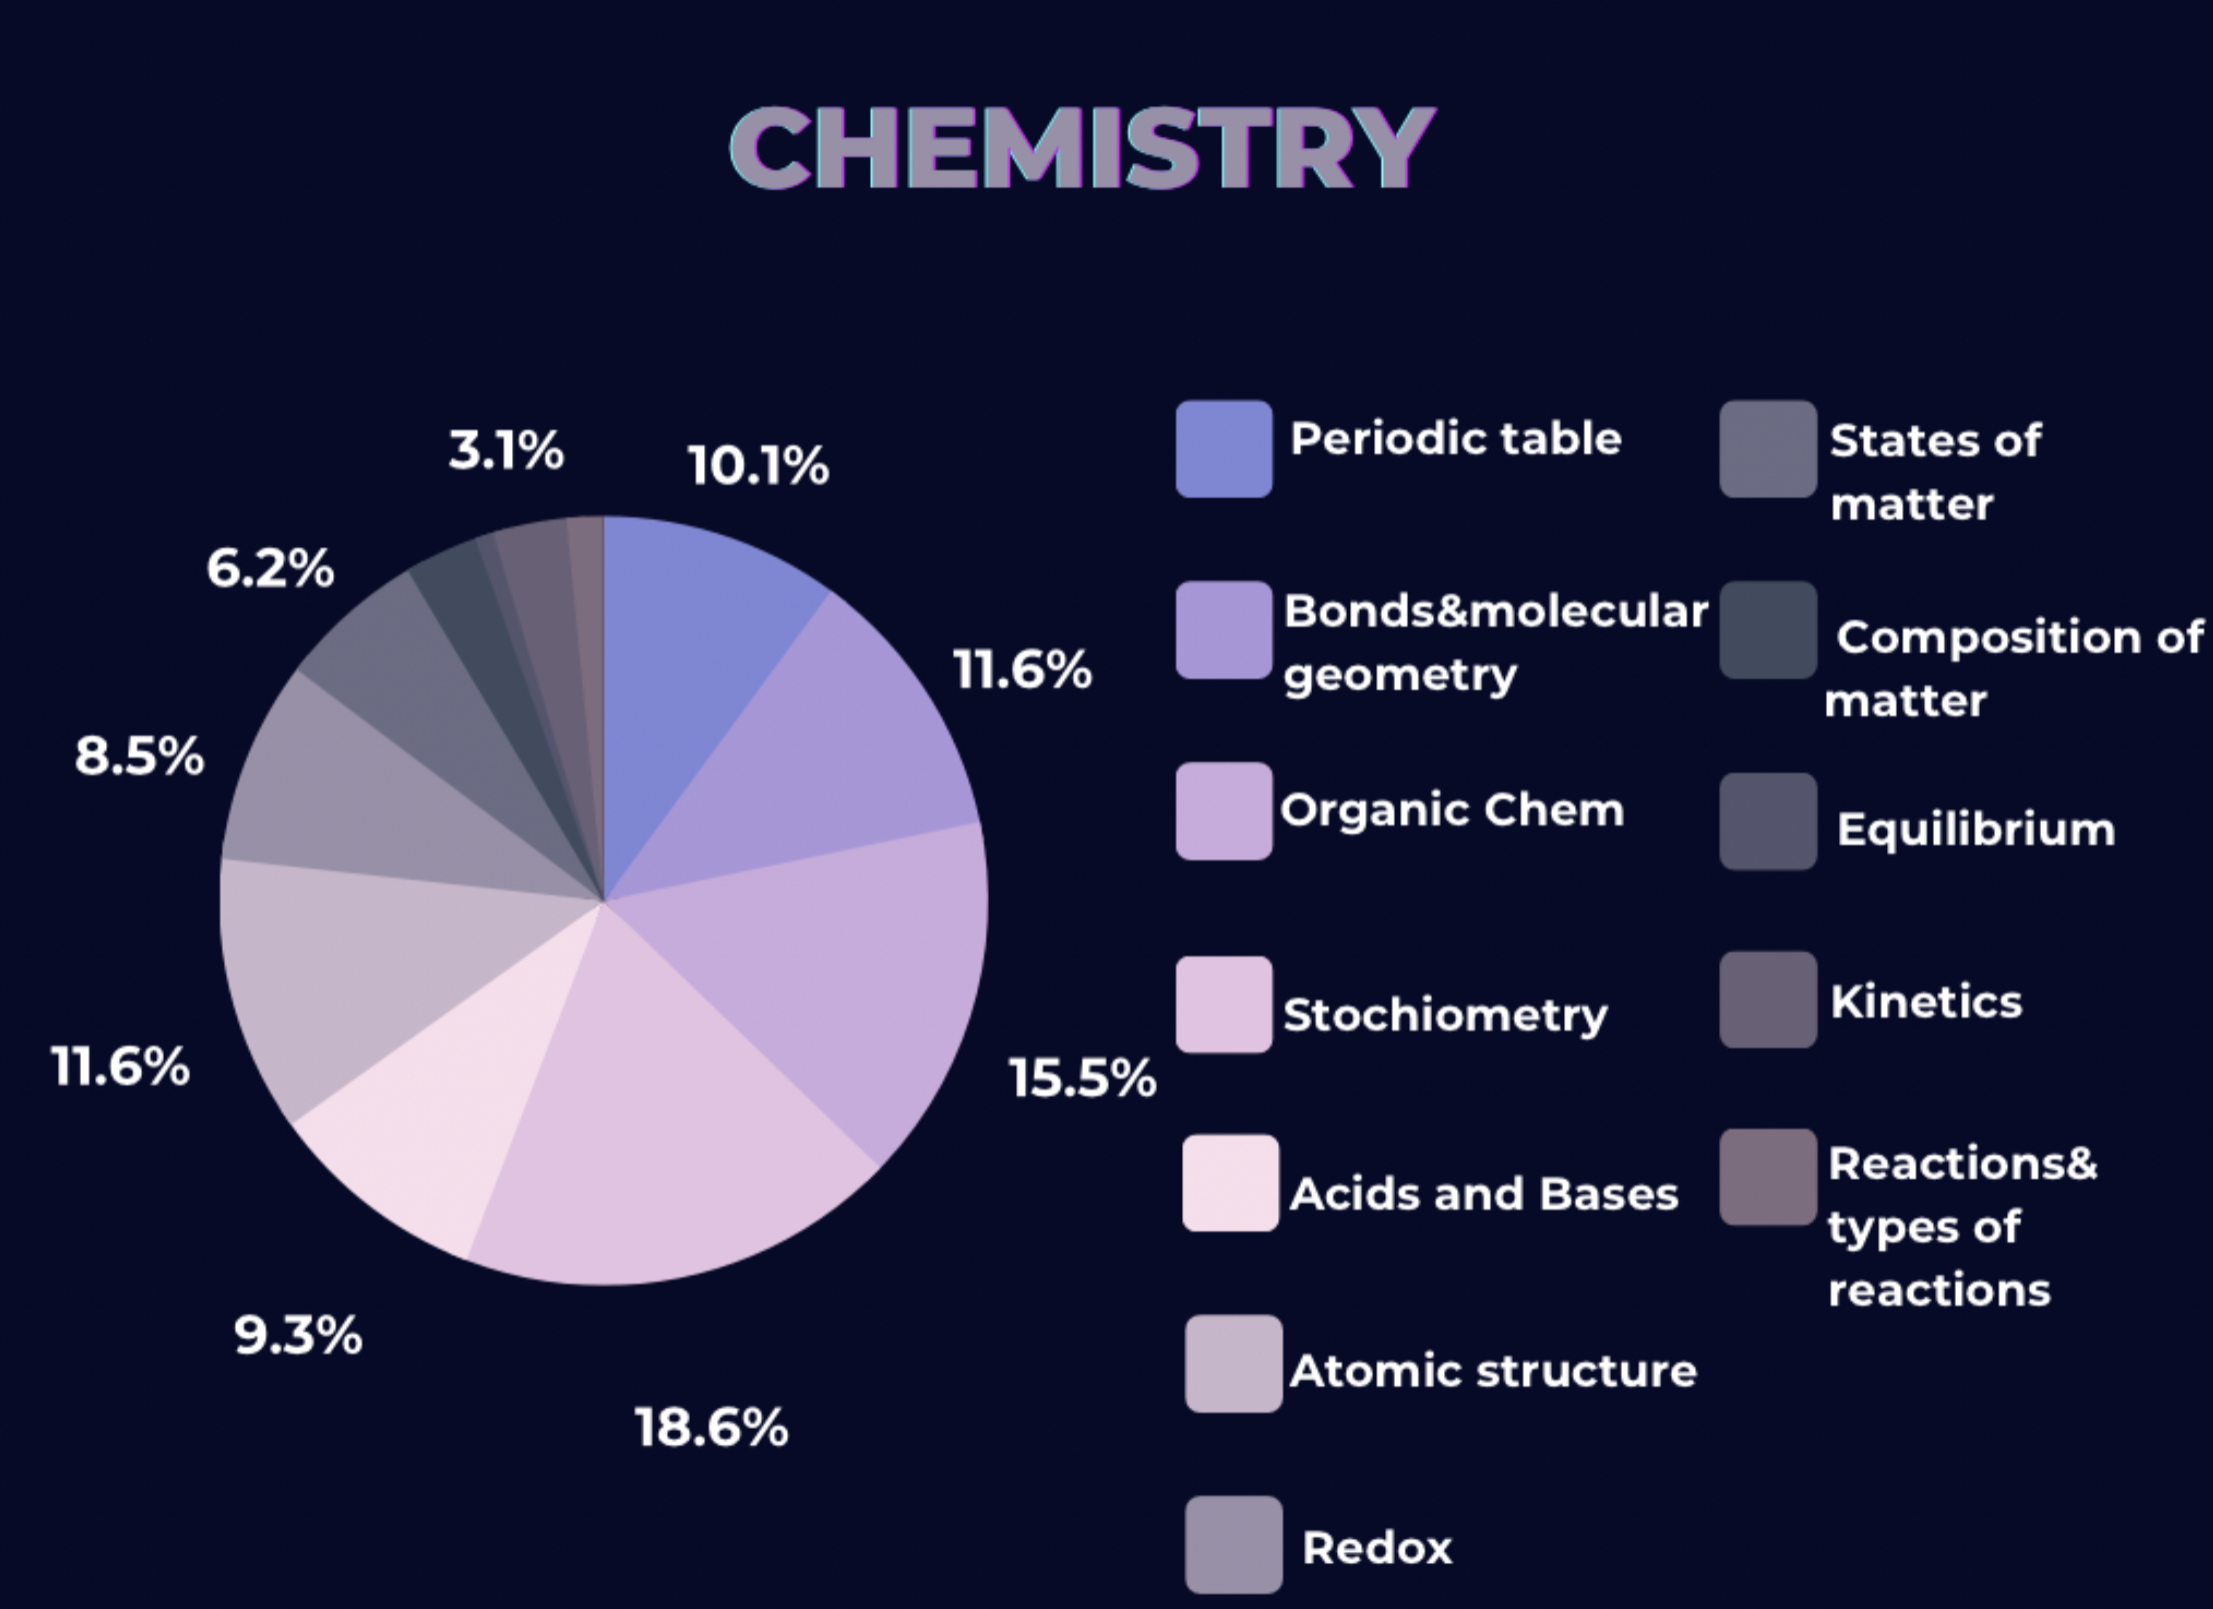 Chemistry section analysis of past IMATs by topic